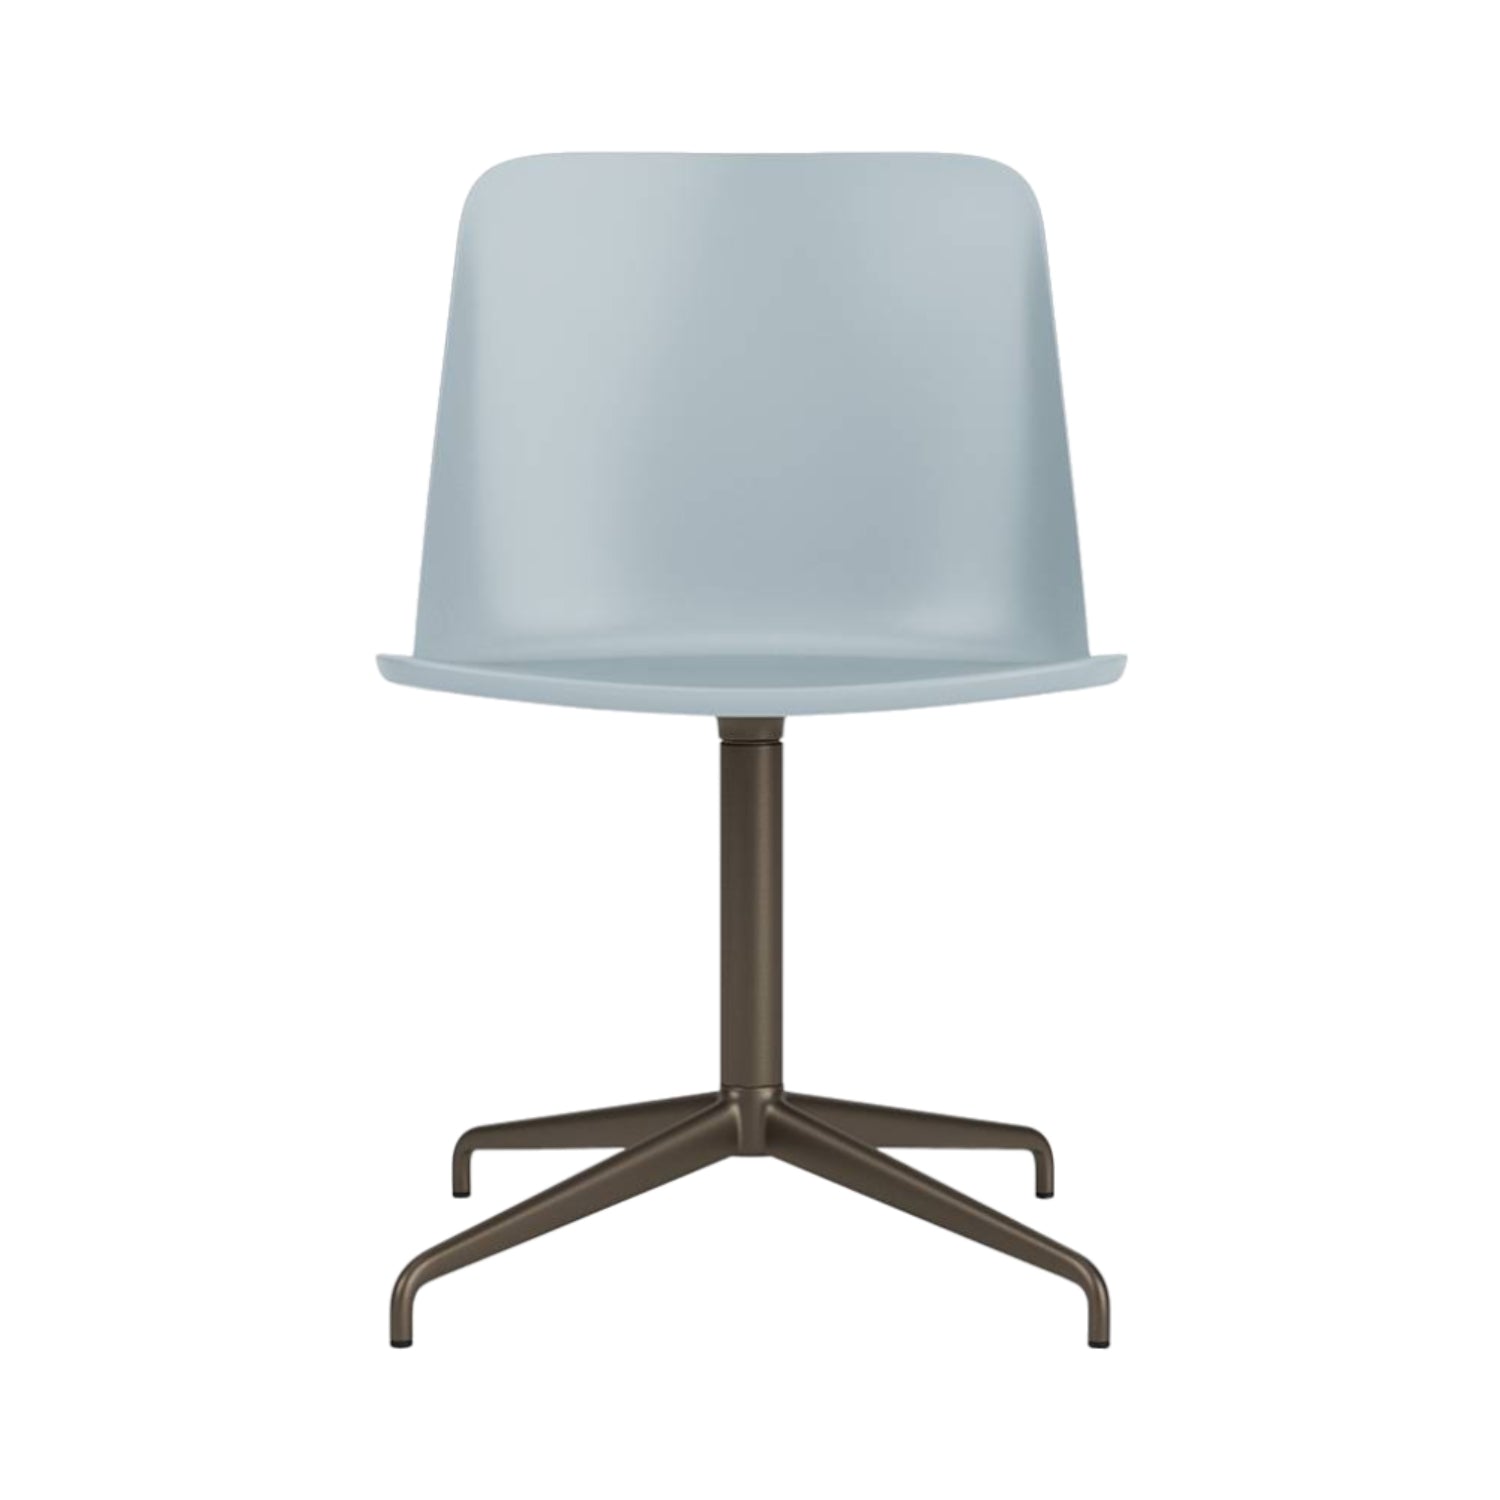 Rely Chair HW11: Light Blue + Bronzed